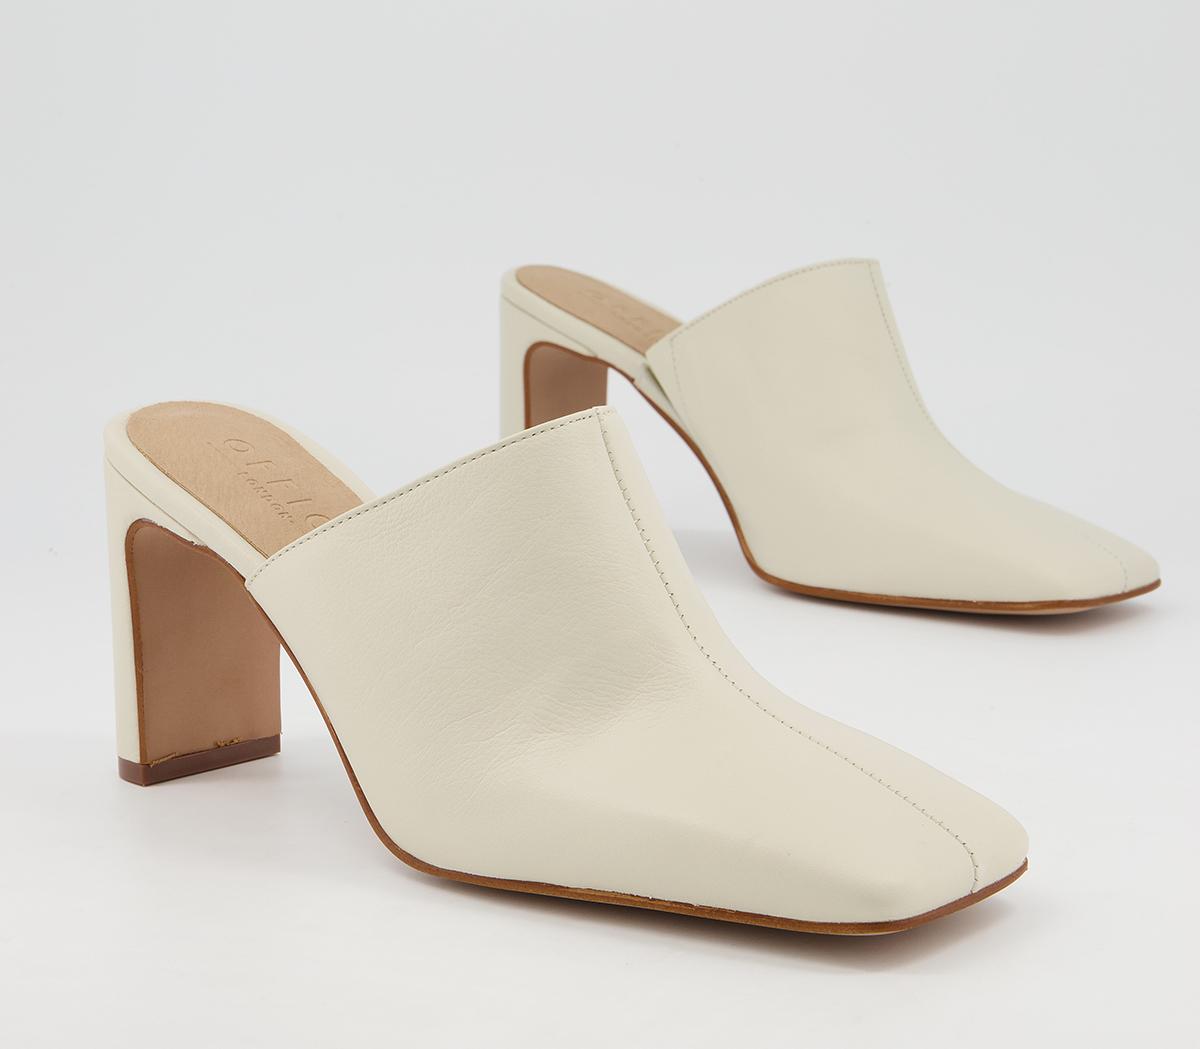 OFFICE Mail Mule Mid Heels Off White Leather - Mid Heels